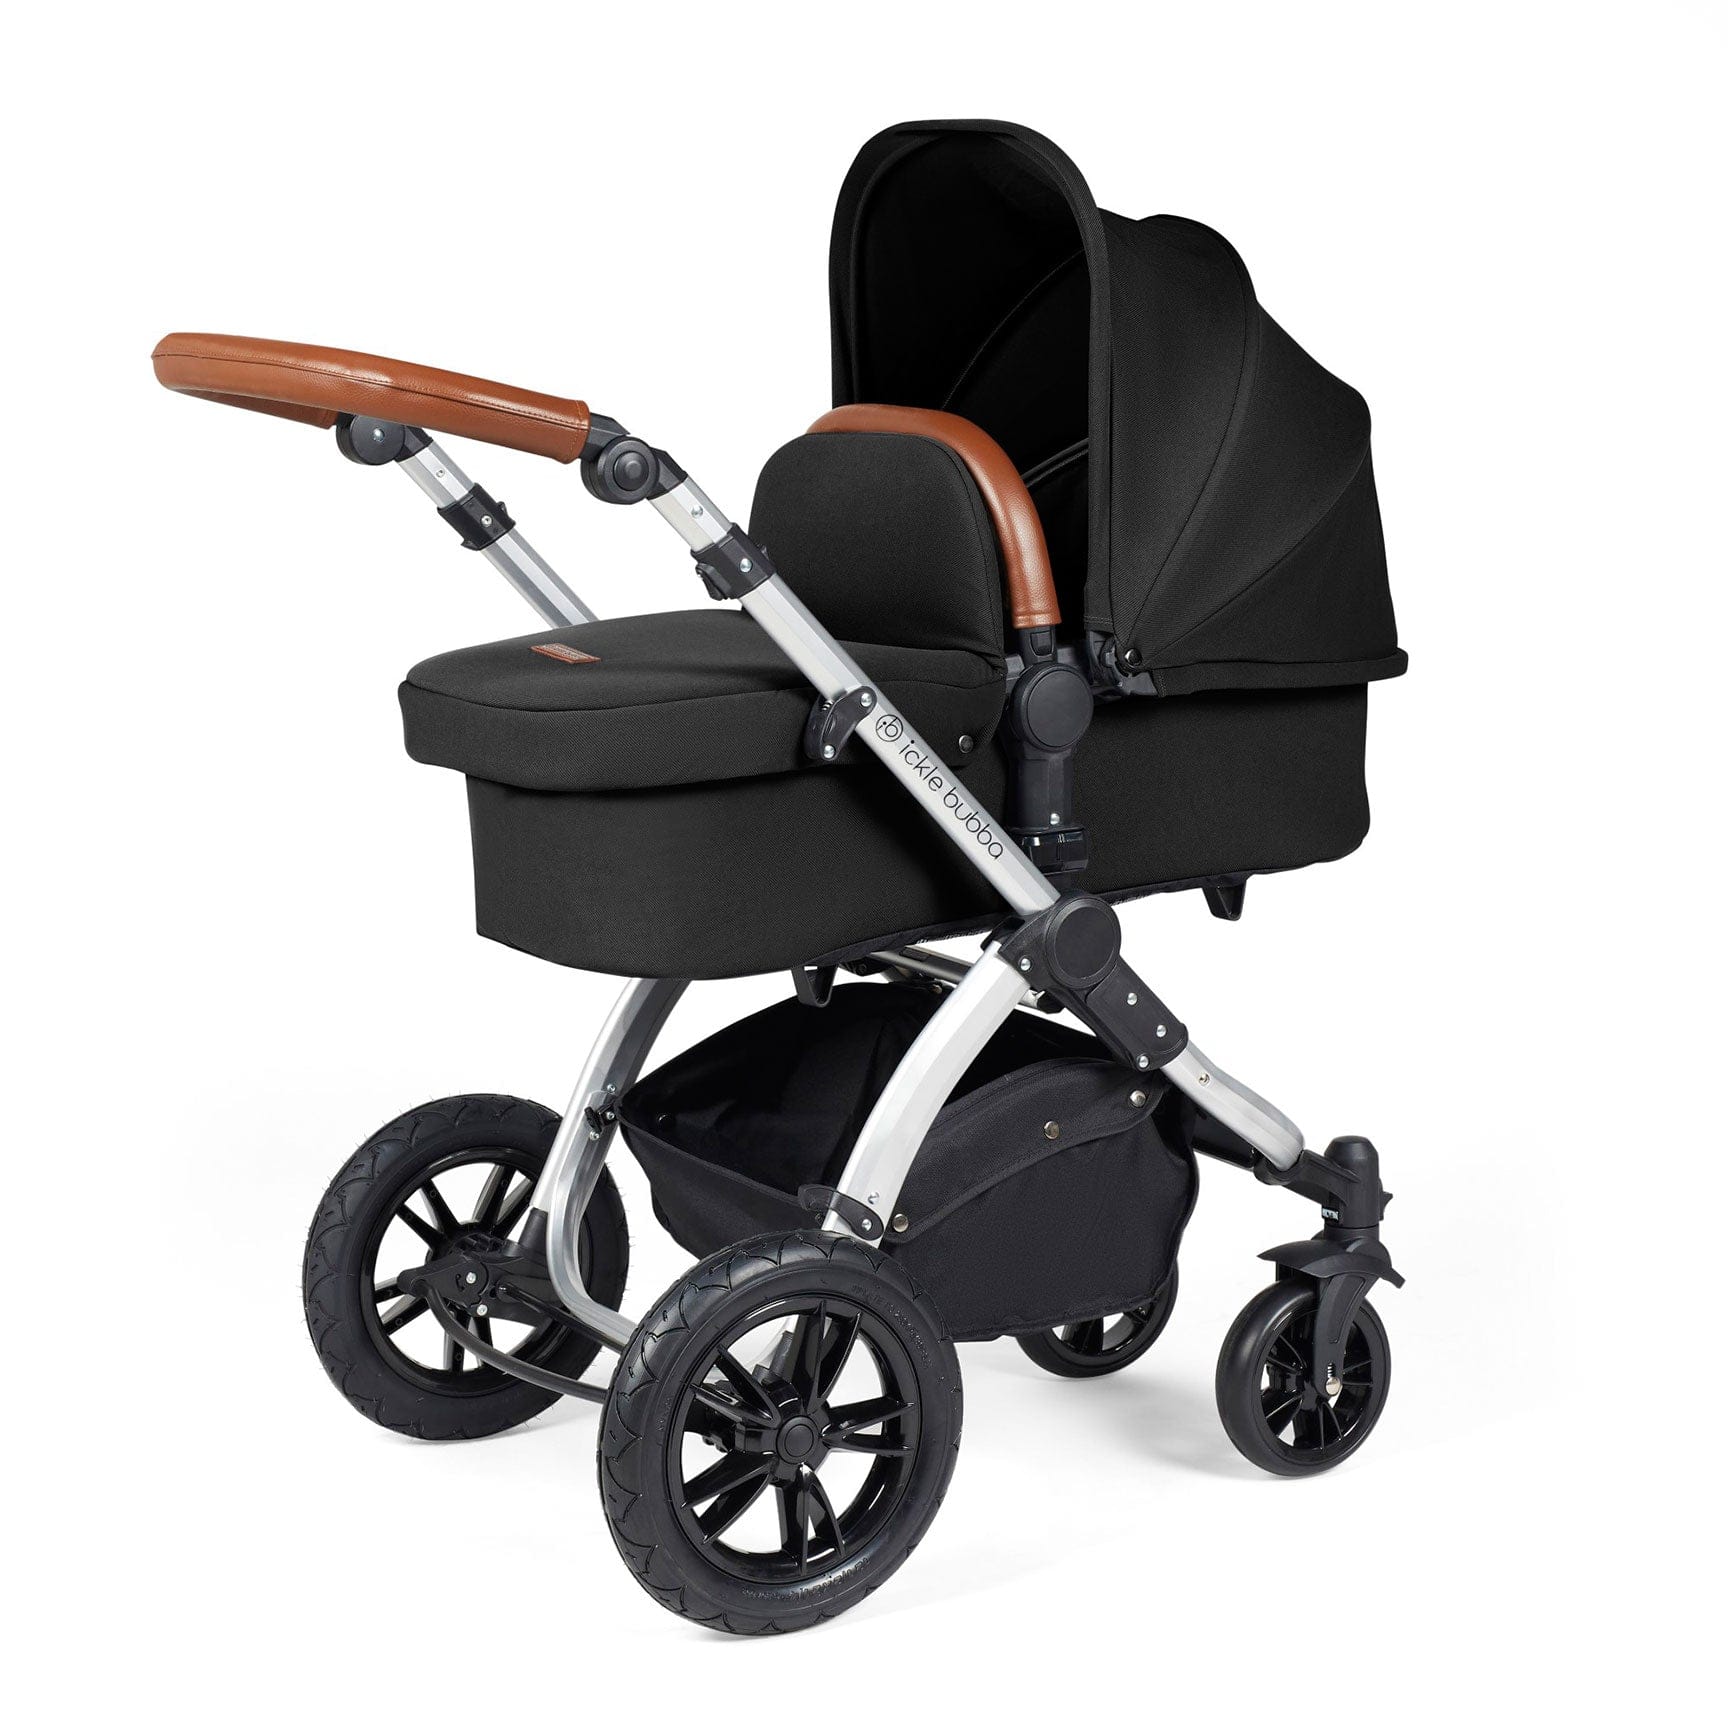 Ickle Bubba travel systems Ickle Bubba Stomp Luxe 2 in 1 Plus Pushchair & Carrycot - Silver/Midnight/Tan 10-003-001-250